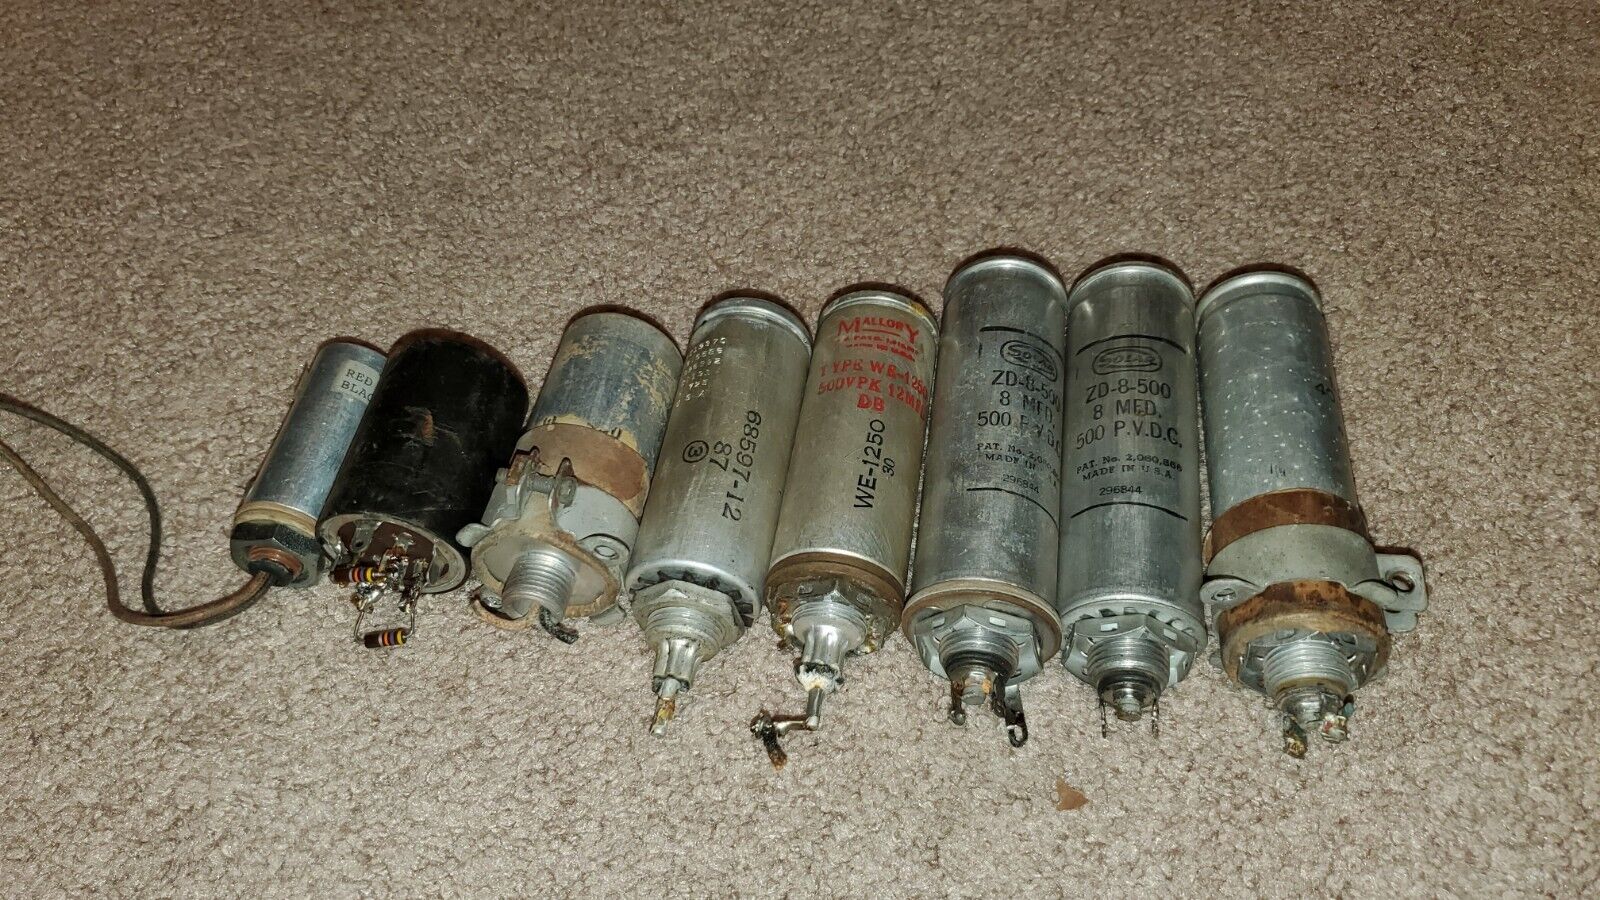 Lot of 8 Used Chassis Mount Electrolytic Capacitors for Radio, Amplifiers